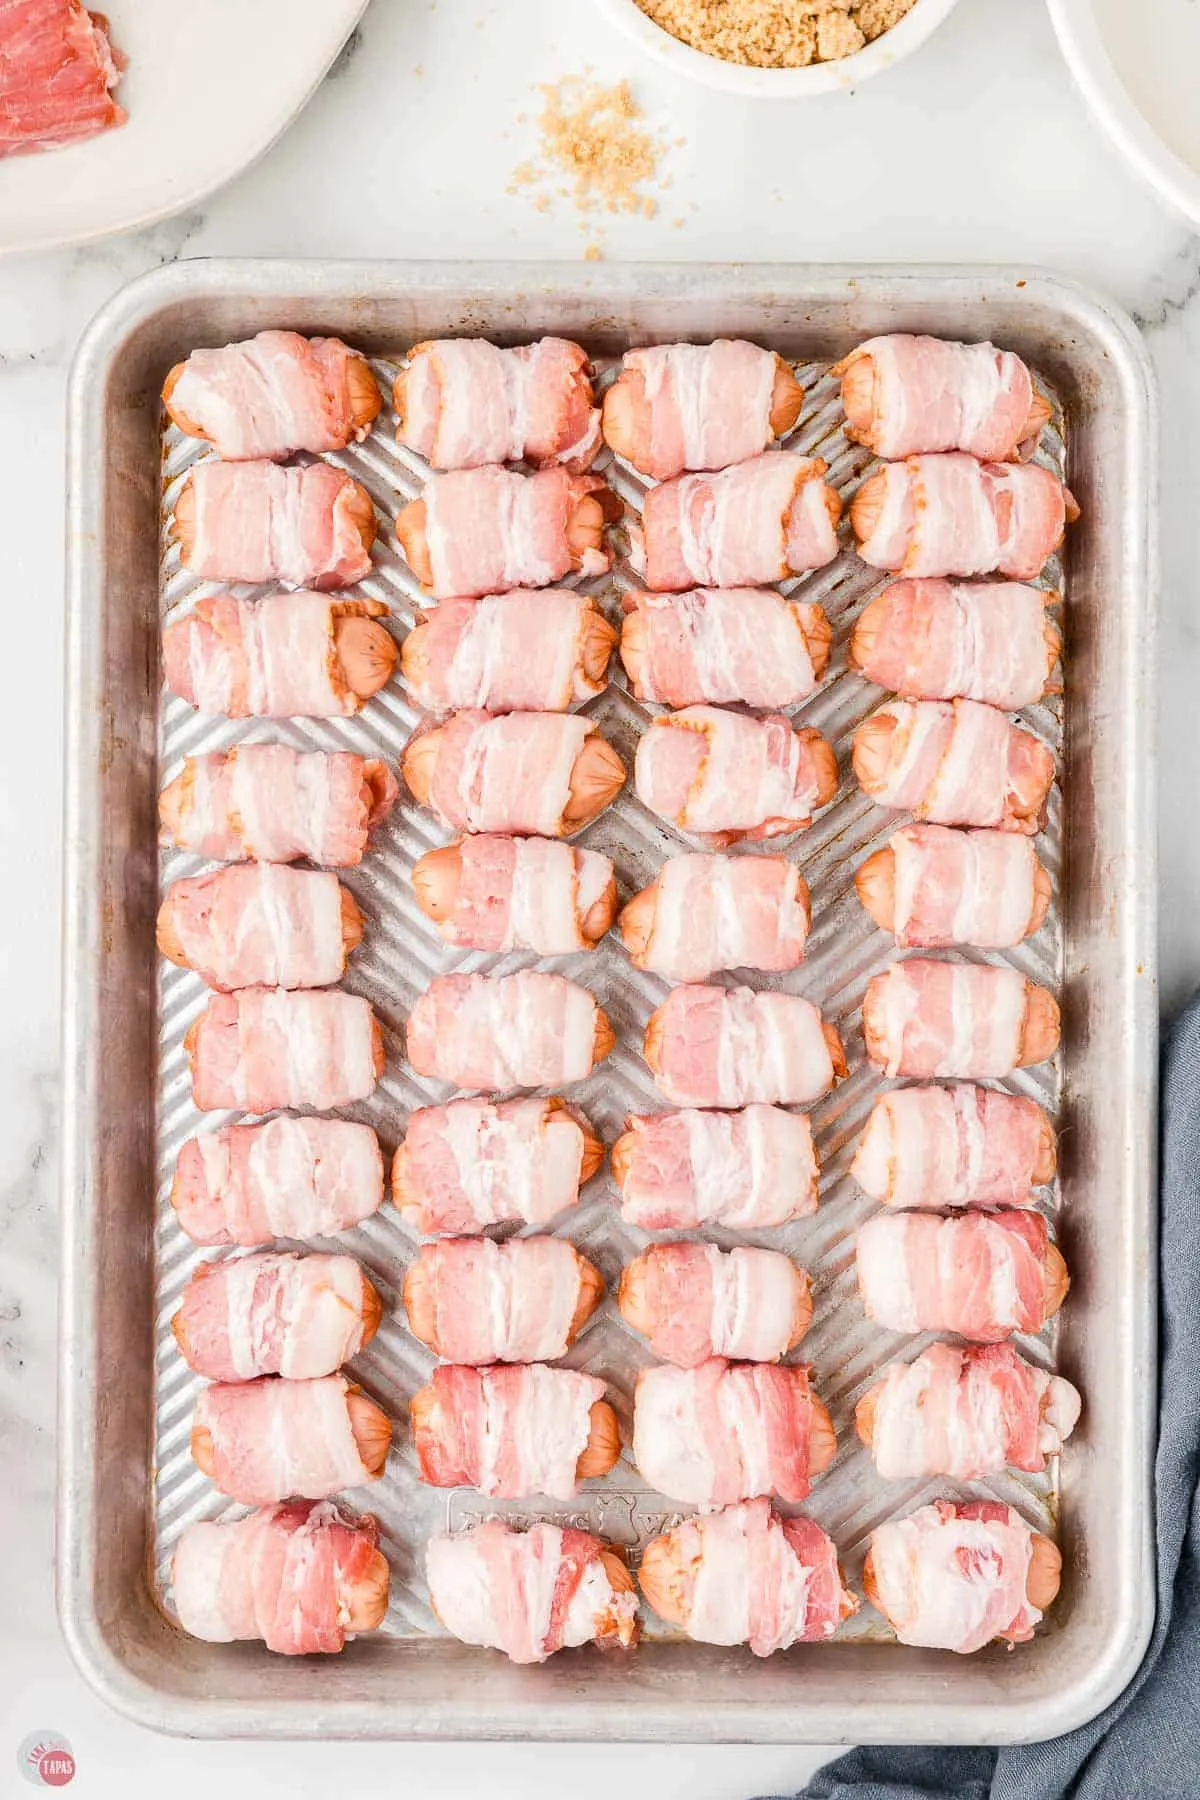 unbaked sausages on a metal cookie sheet